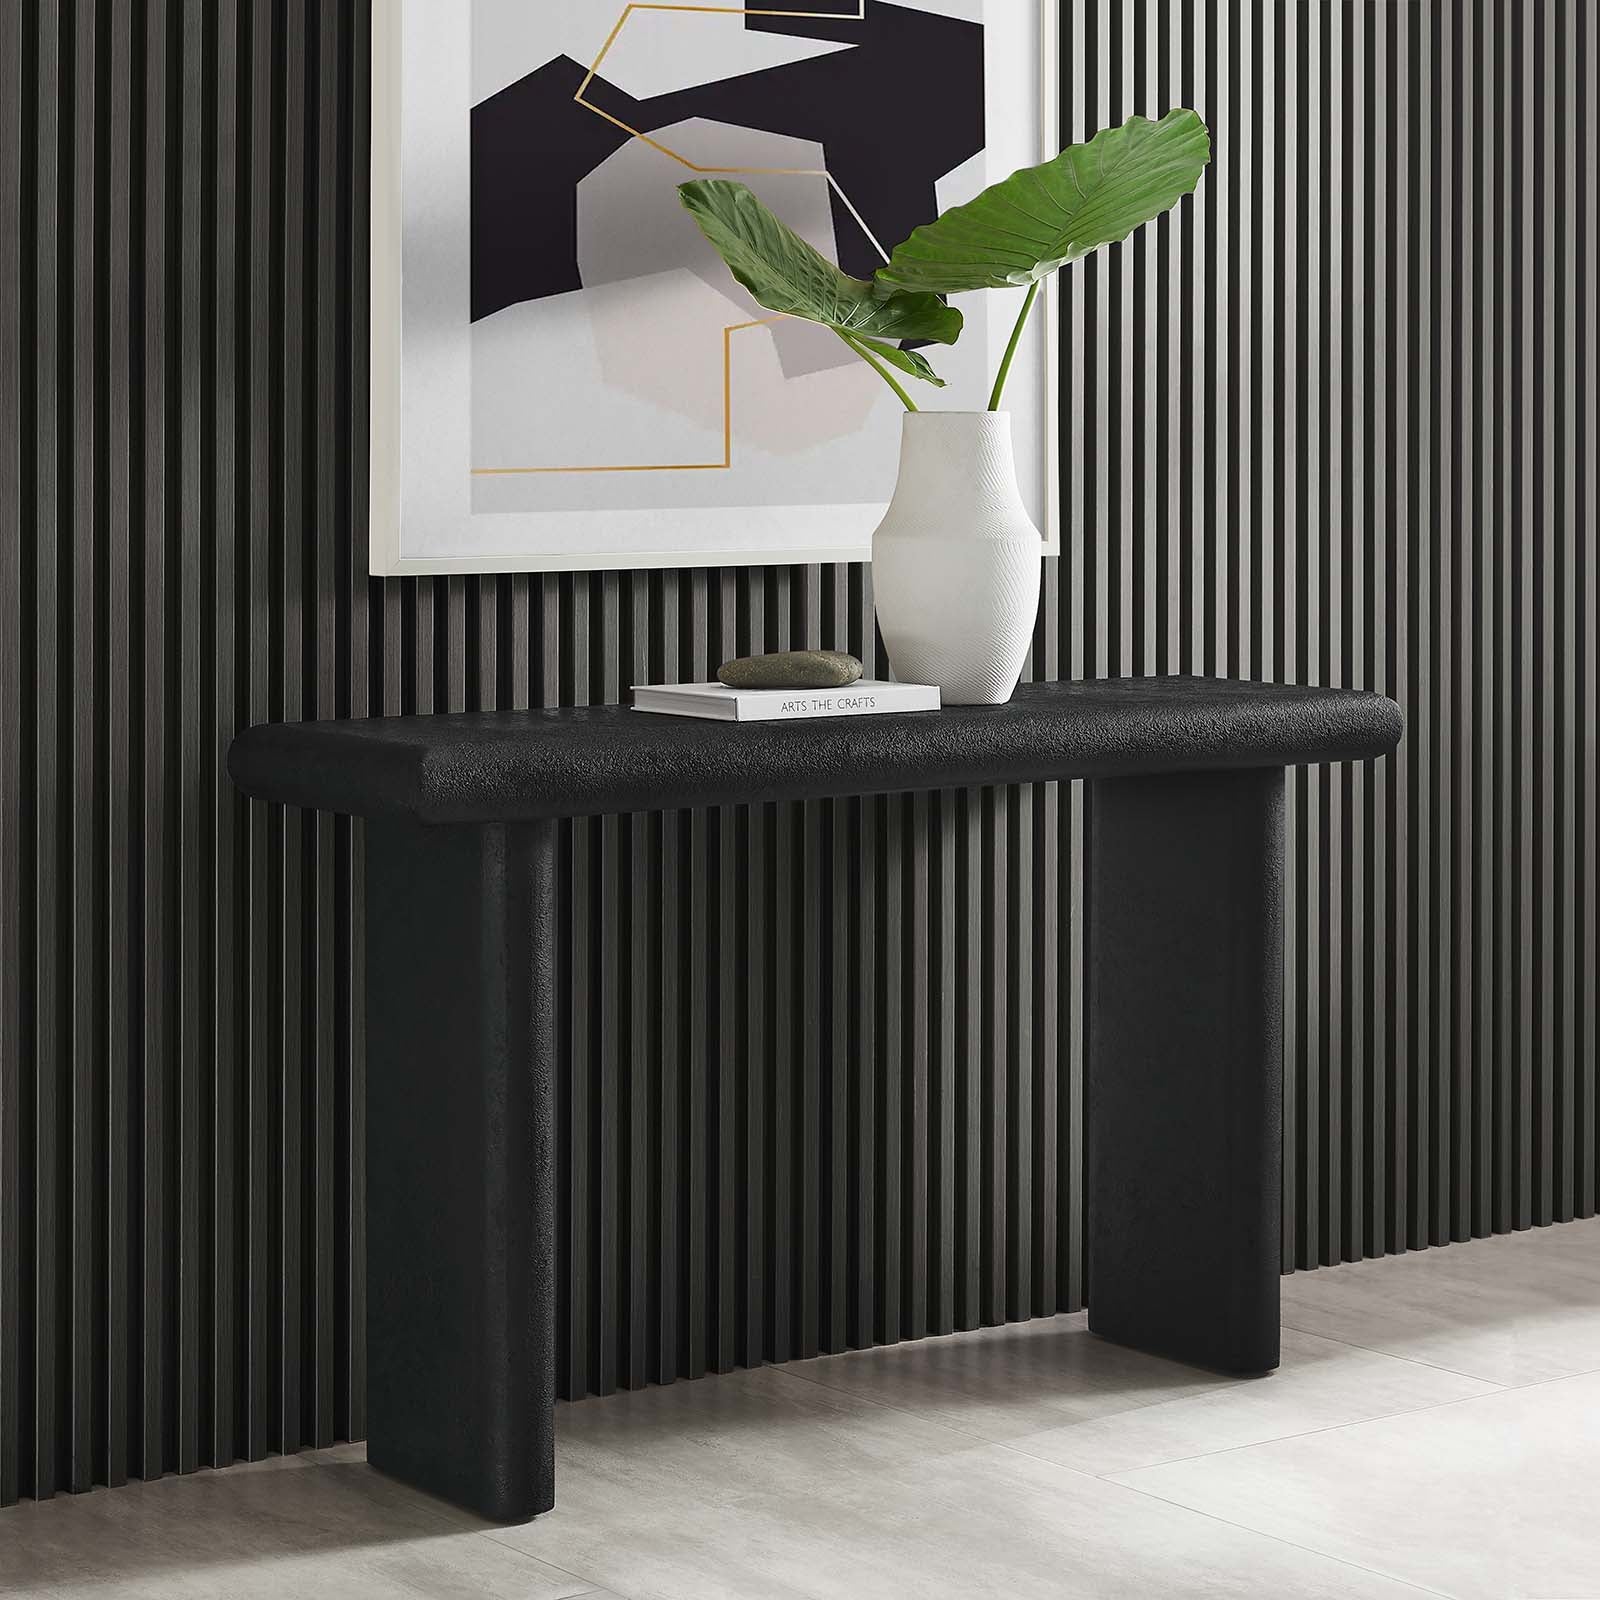 Relic Concrete Textured Console Table - East Shore Modern Home Furnishings